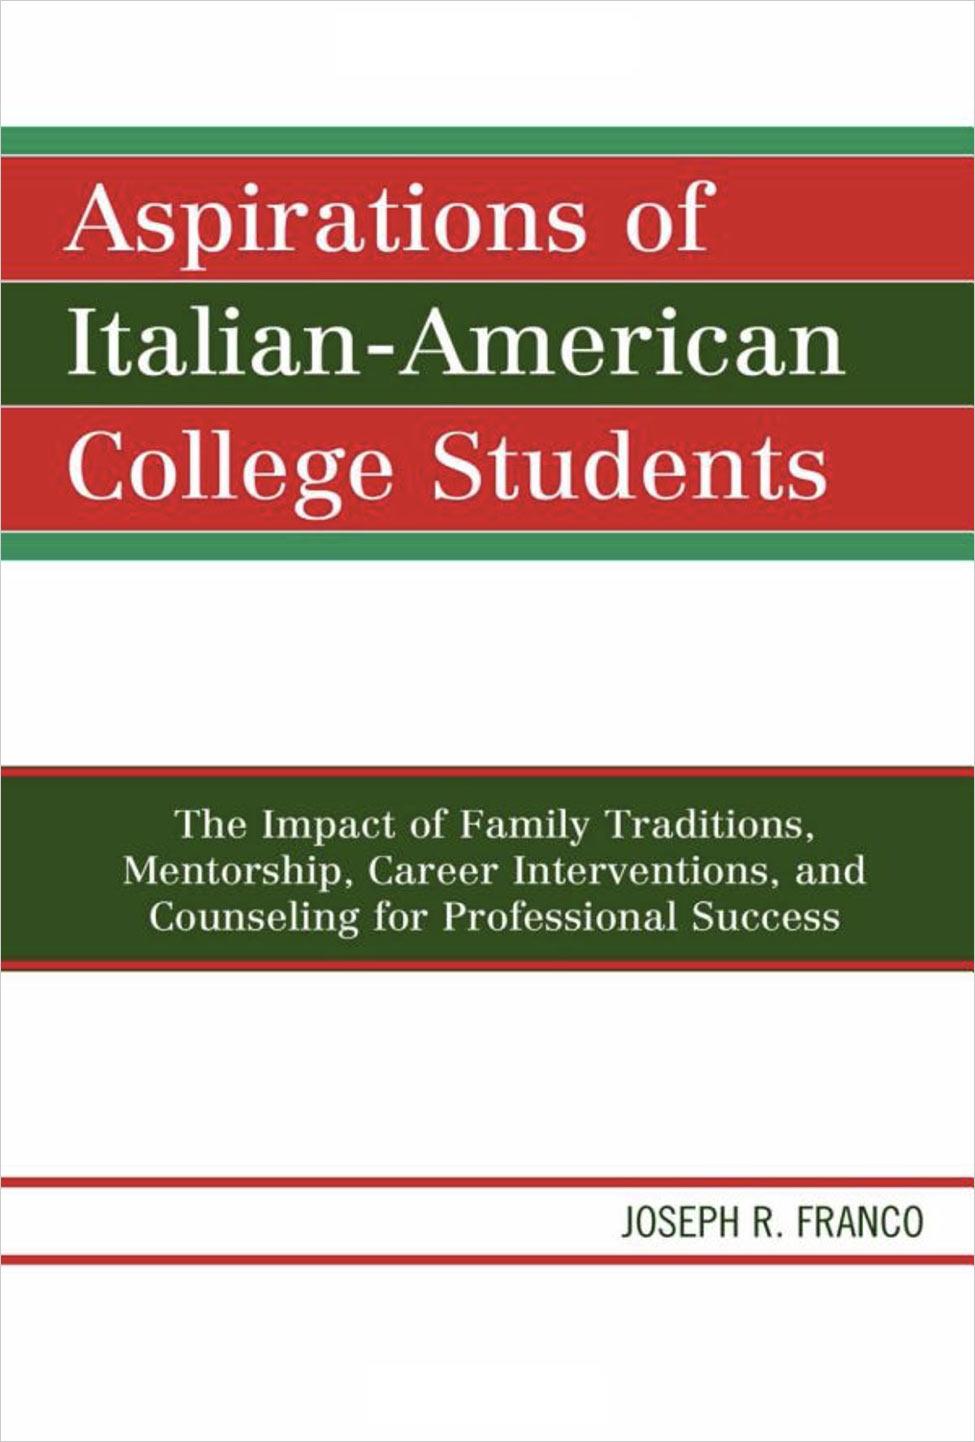 Aspirations Of Italian-American College Students: The Impact Of Family Traditions, Mentorship, Career Interventions, And Counseling For Professional Success by Joseph Franco